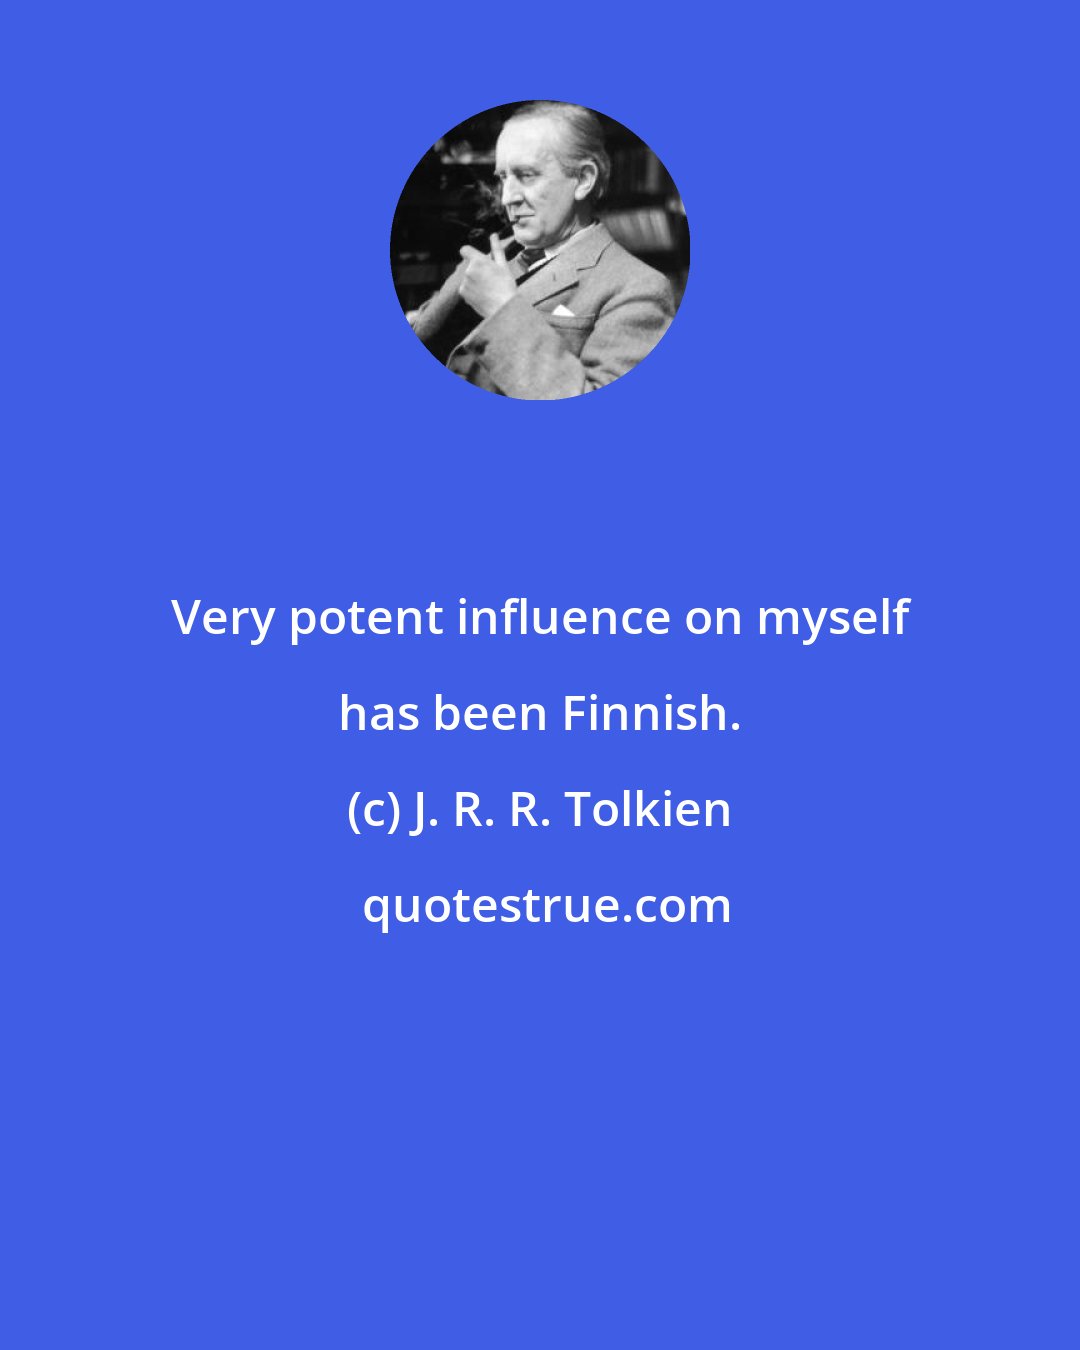 J. R. R. Tolkien: Very potent influence on myself has been Finnish.